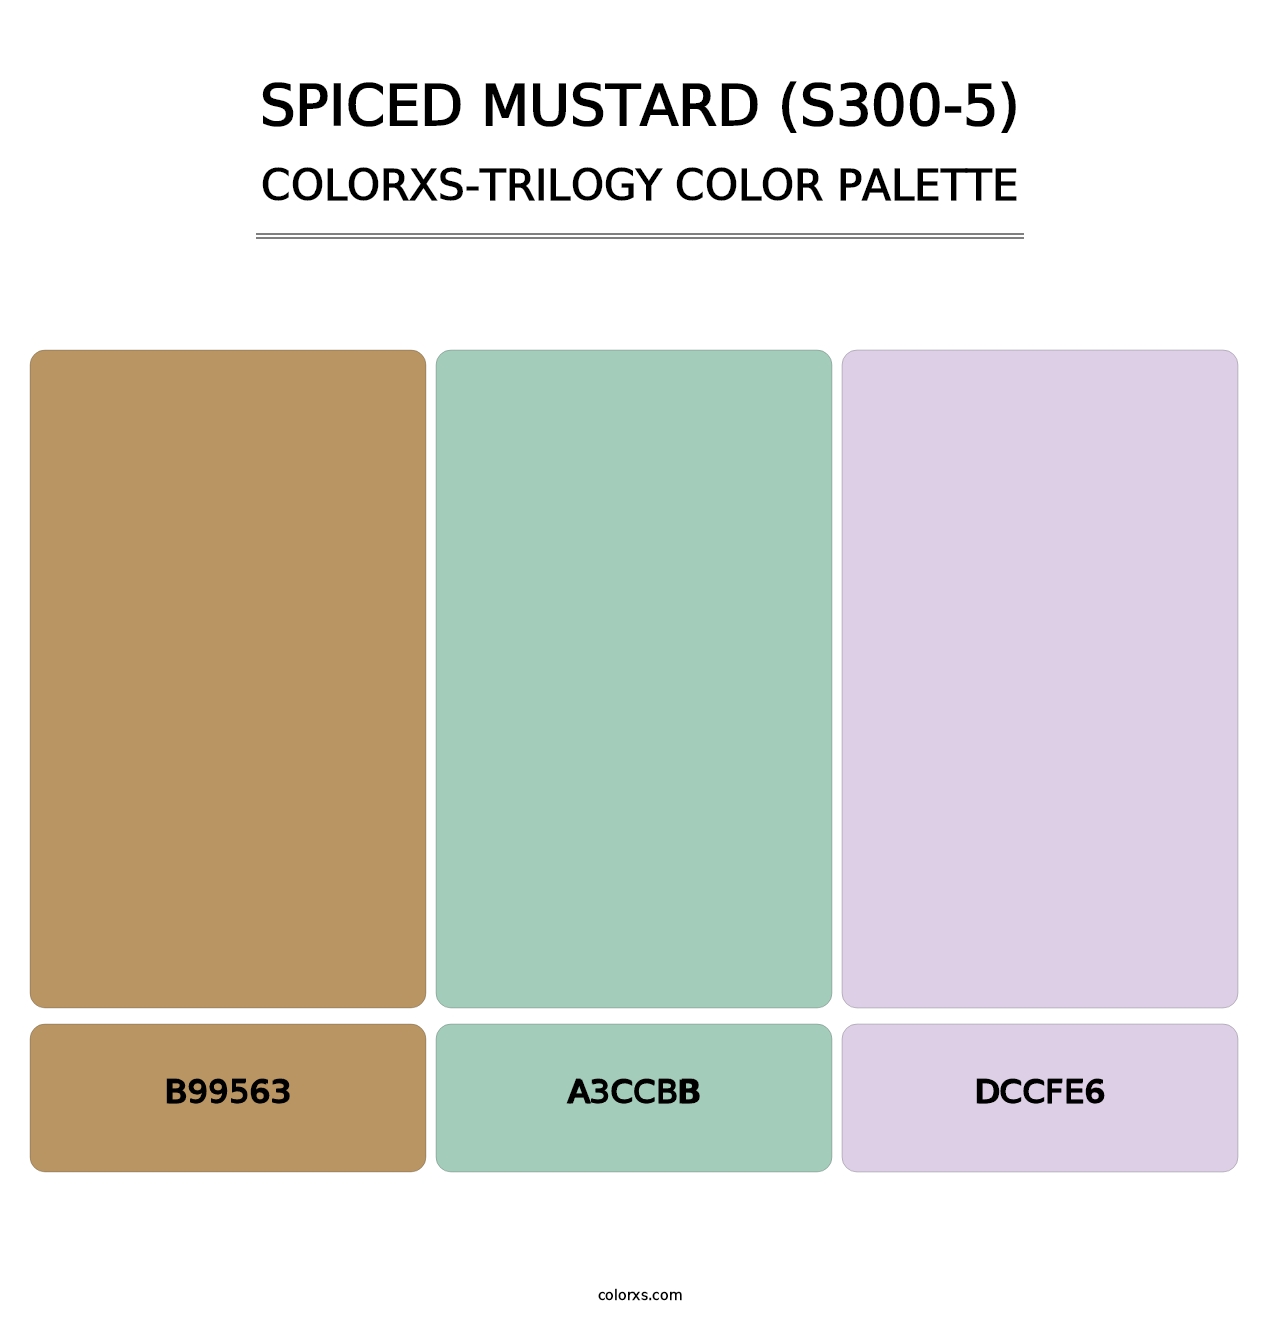 Spiced Mustard (S300-5) - Colorxs Trilogy Palette